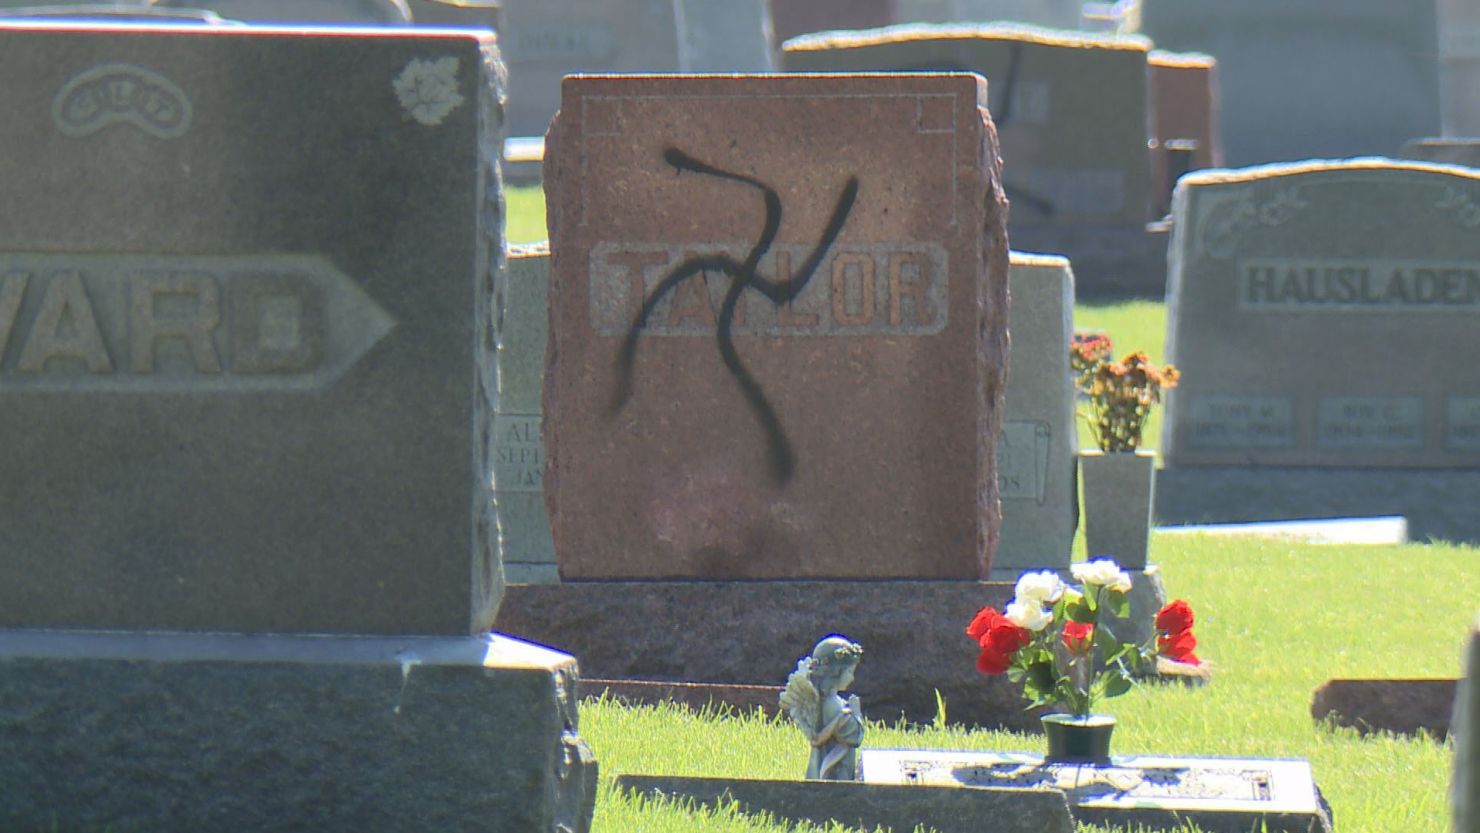 A vandalized cemetery tombstone in Glen Carbon, Illinois.